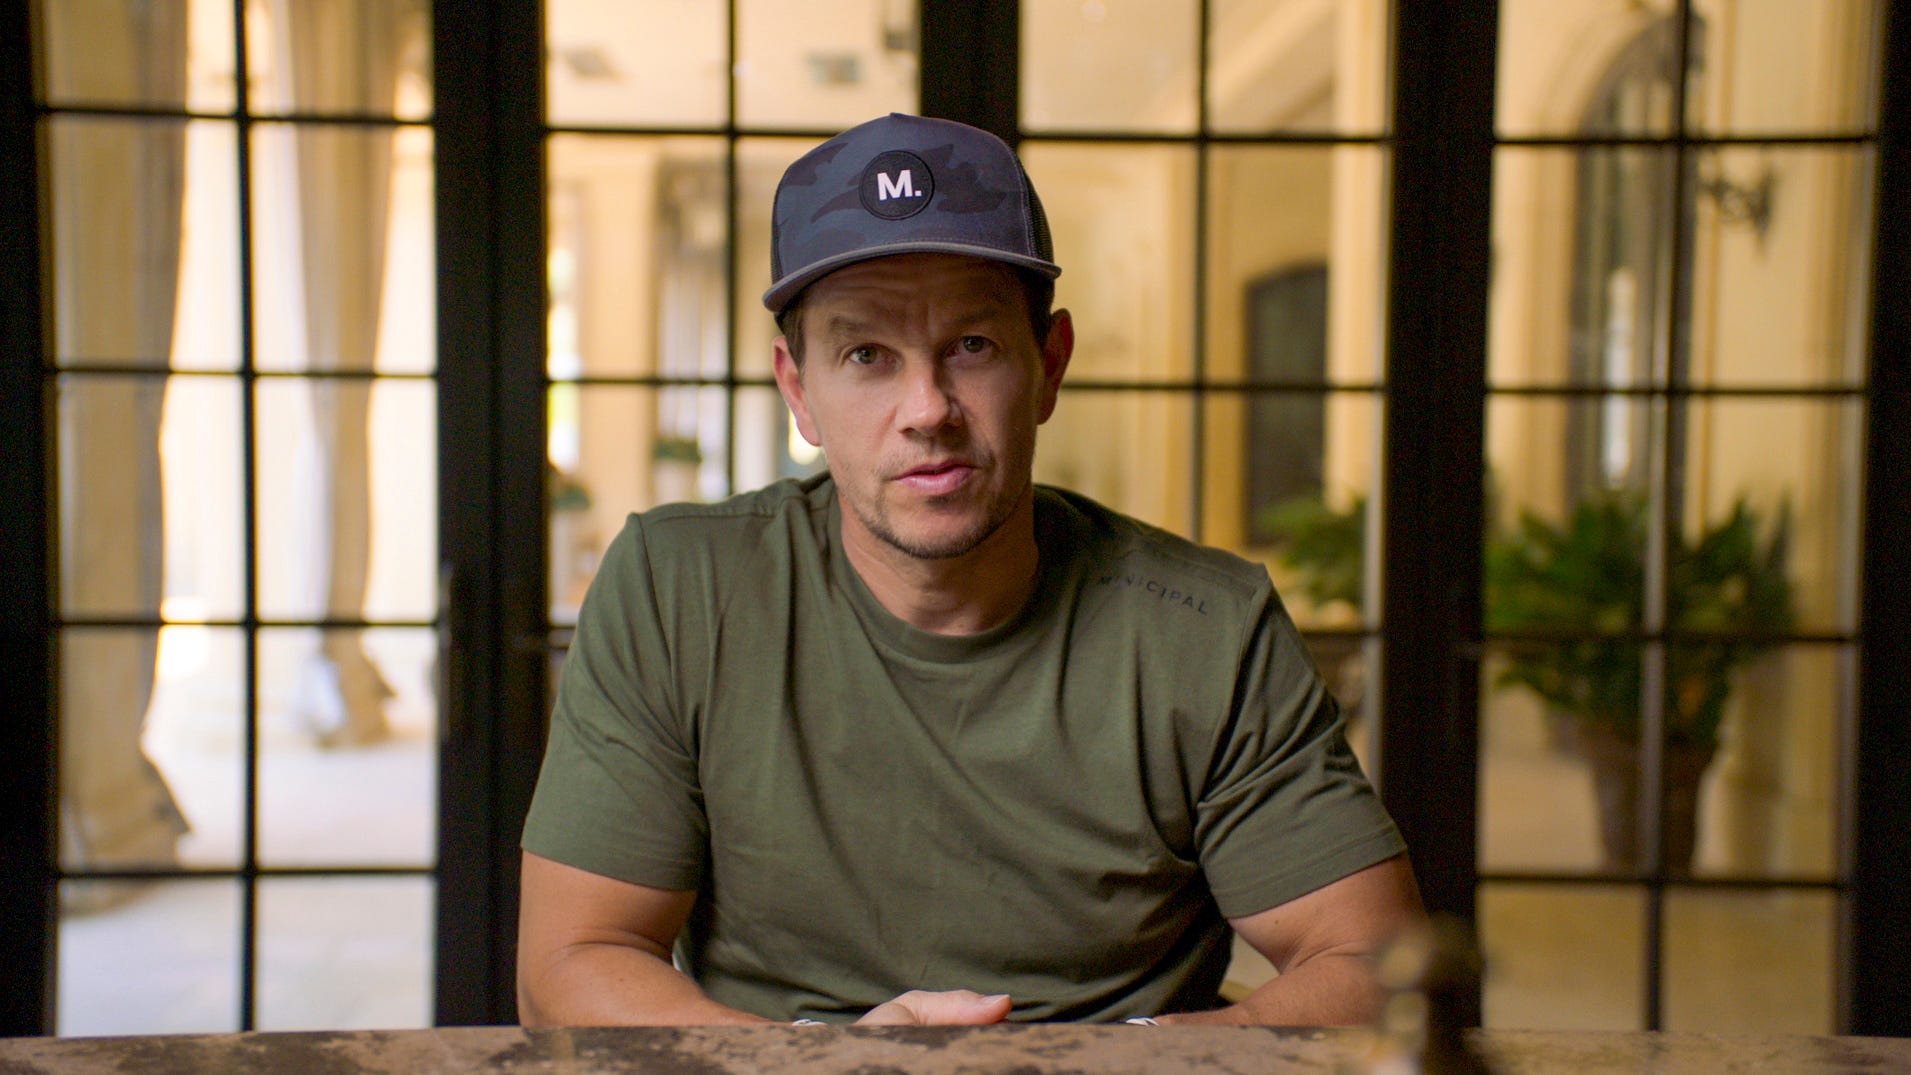 Actor Mark Wahlberg in a one-on-one interview in his own documentary series, Wahl Street.